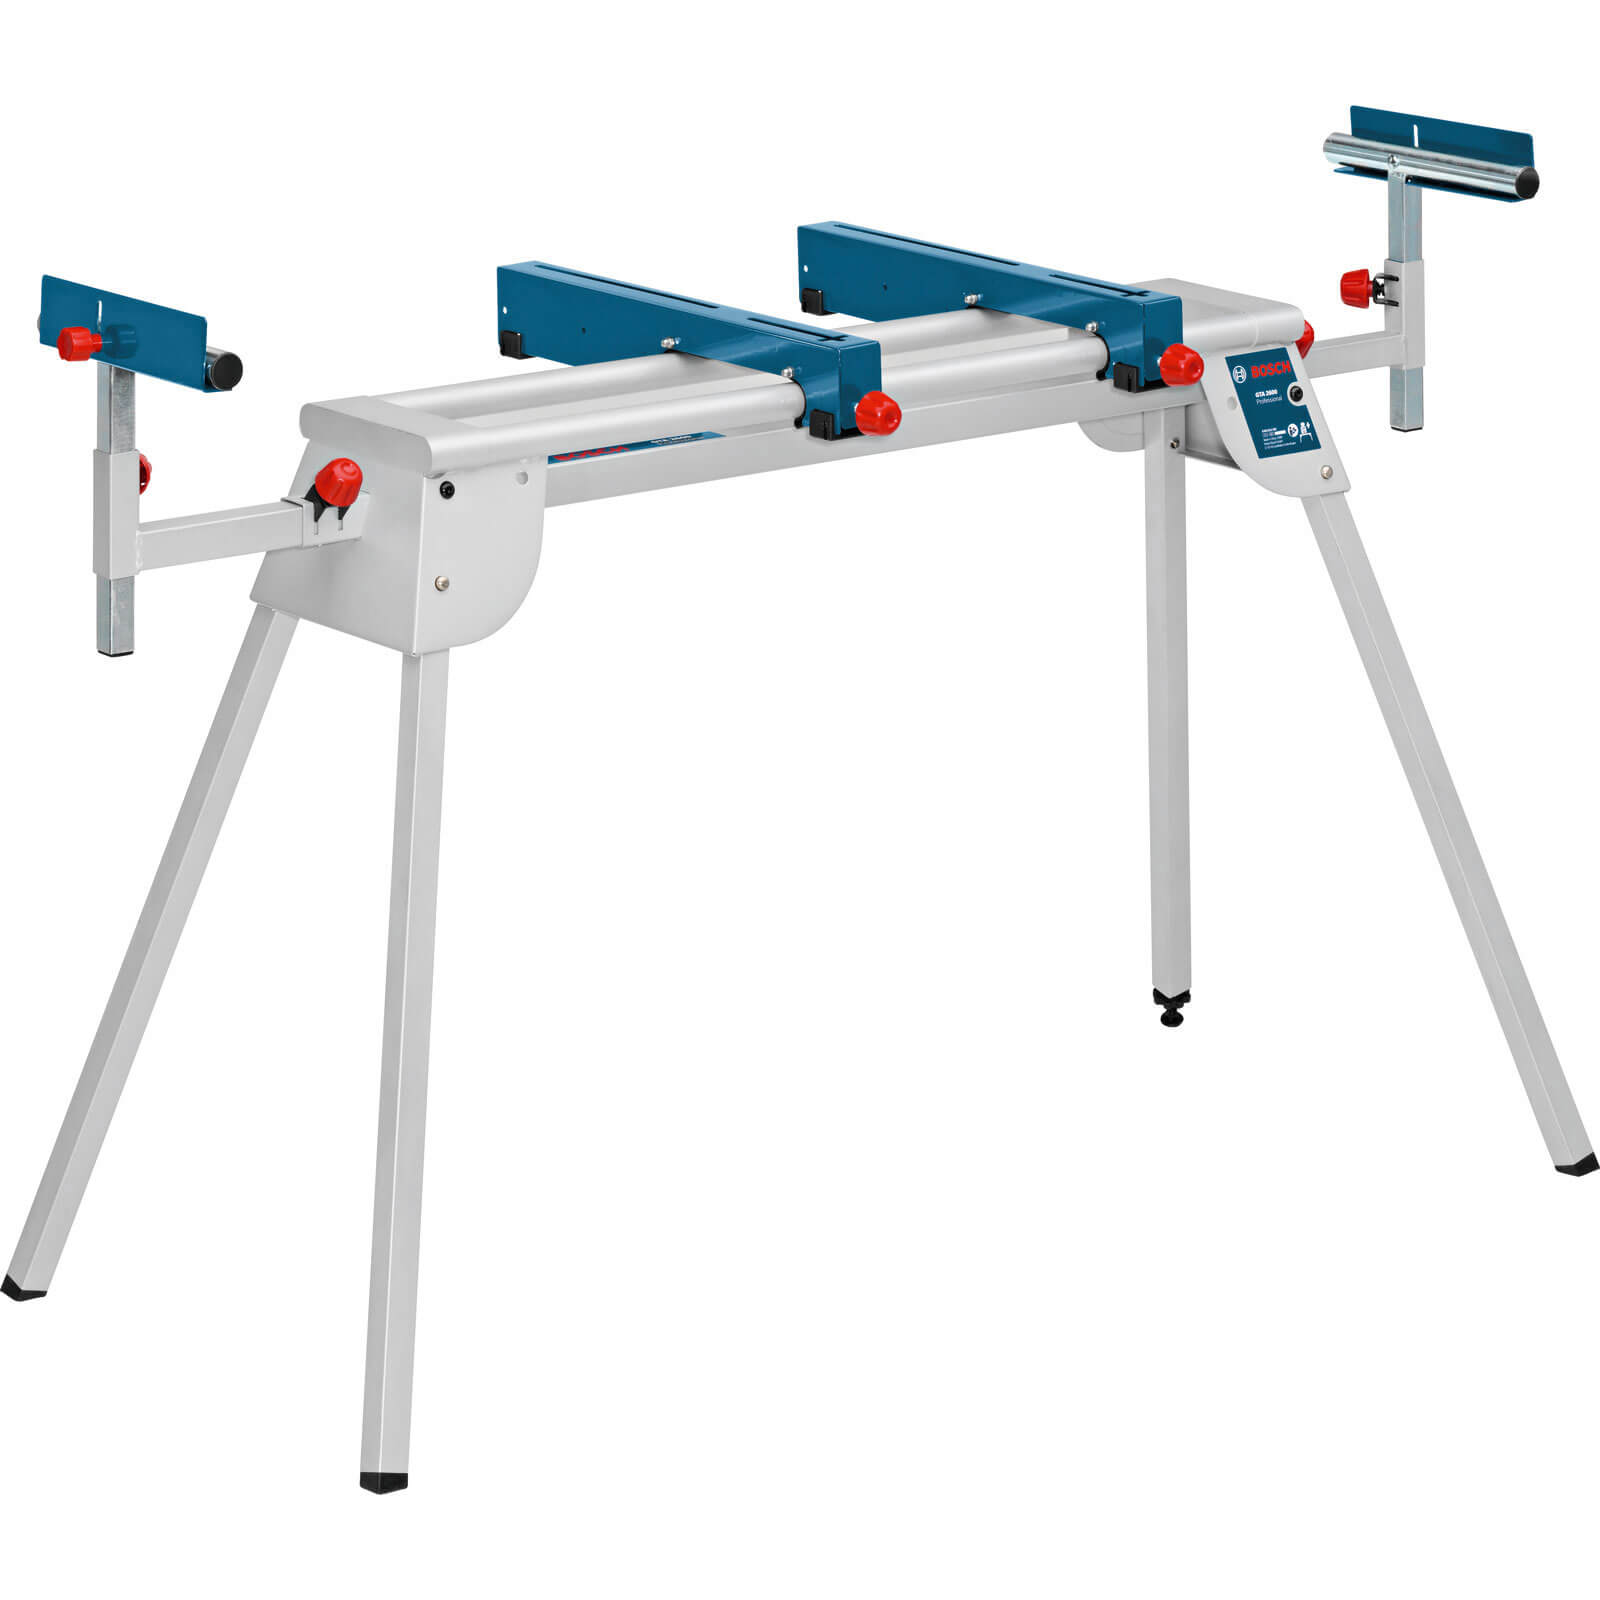 Bosch GTA 2600 Work Stand for Mitre Saws